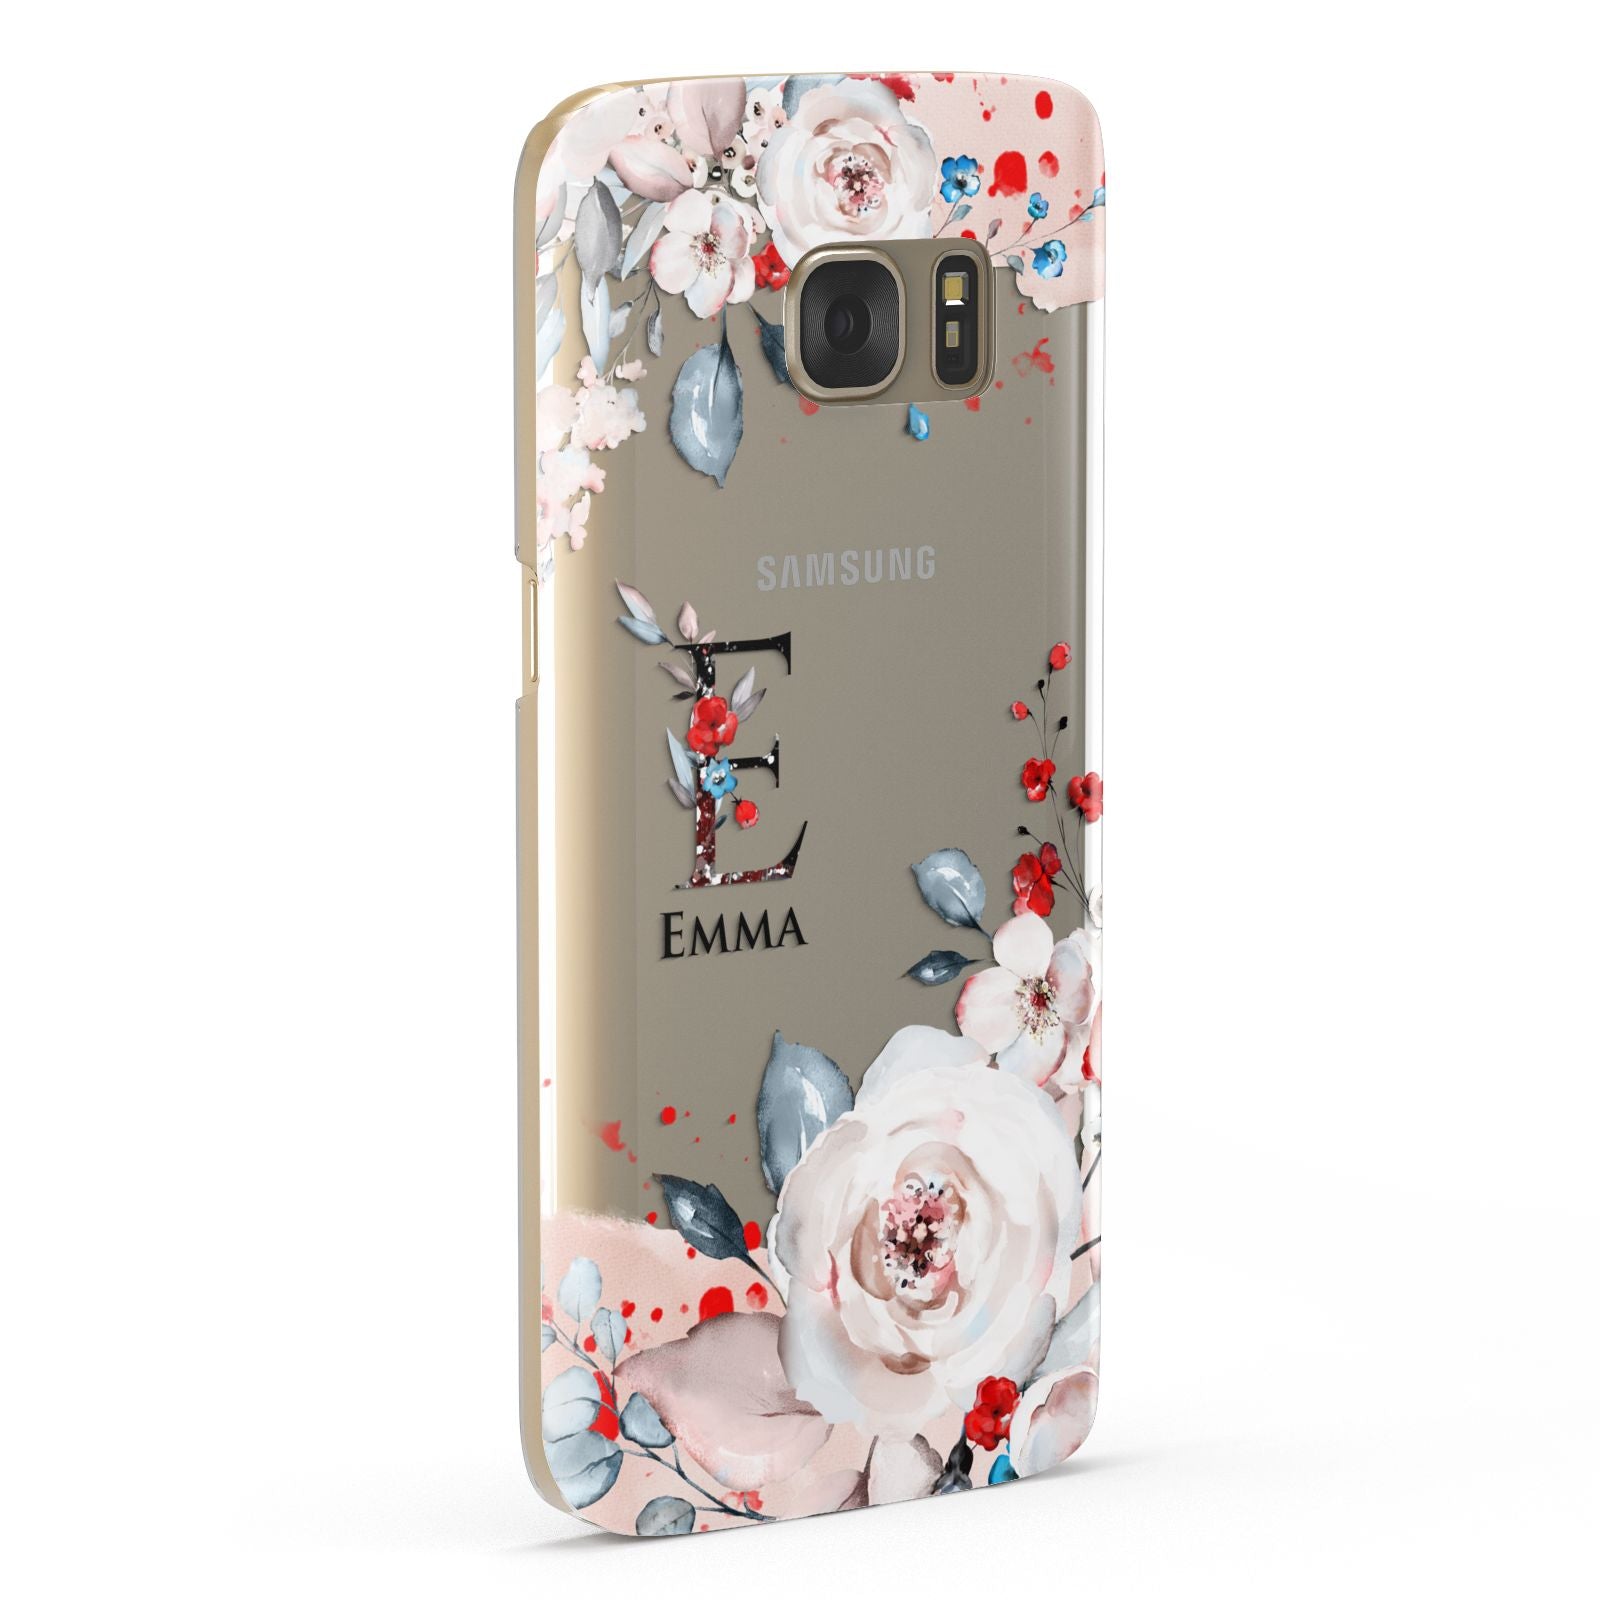 Monogrammed Roses Floral Wreath Samsung Galaxy Case Fourty Five Degrees